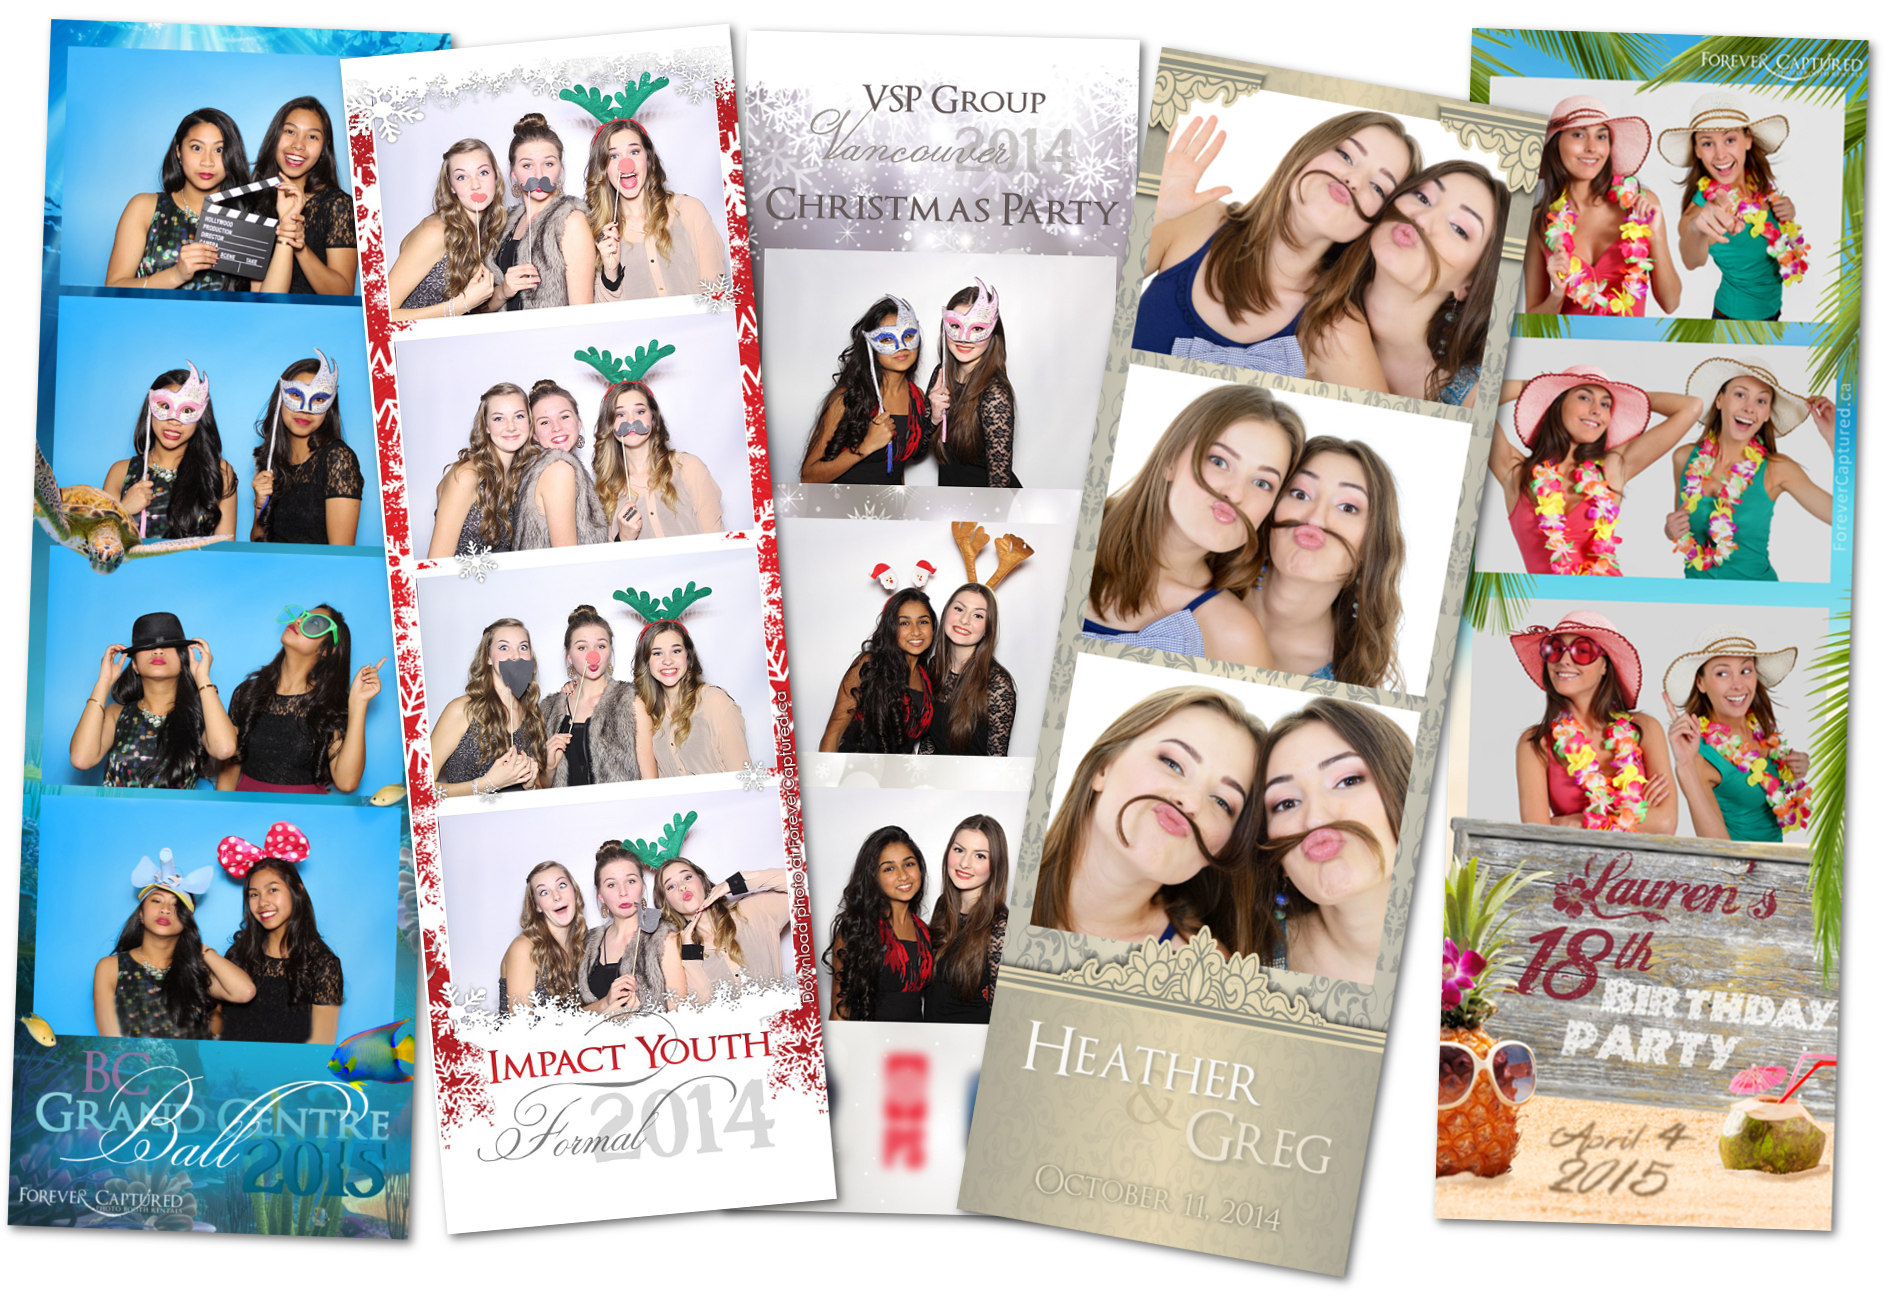 Sample photo layout prints from events in Greater Vancouver.